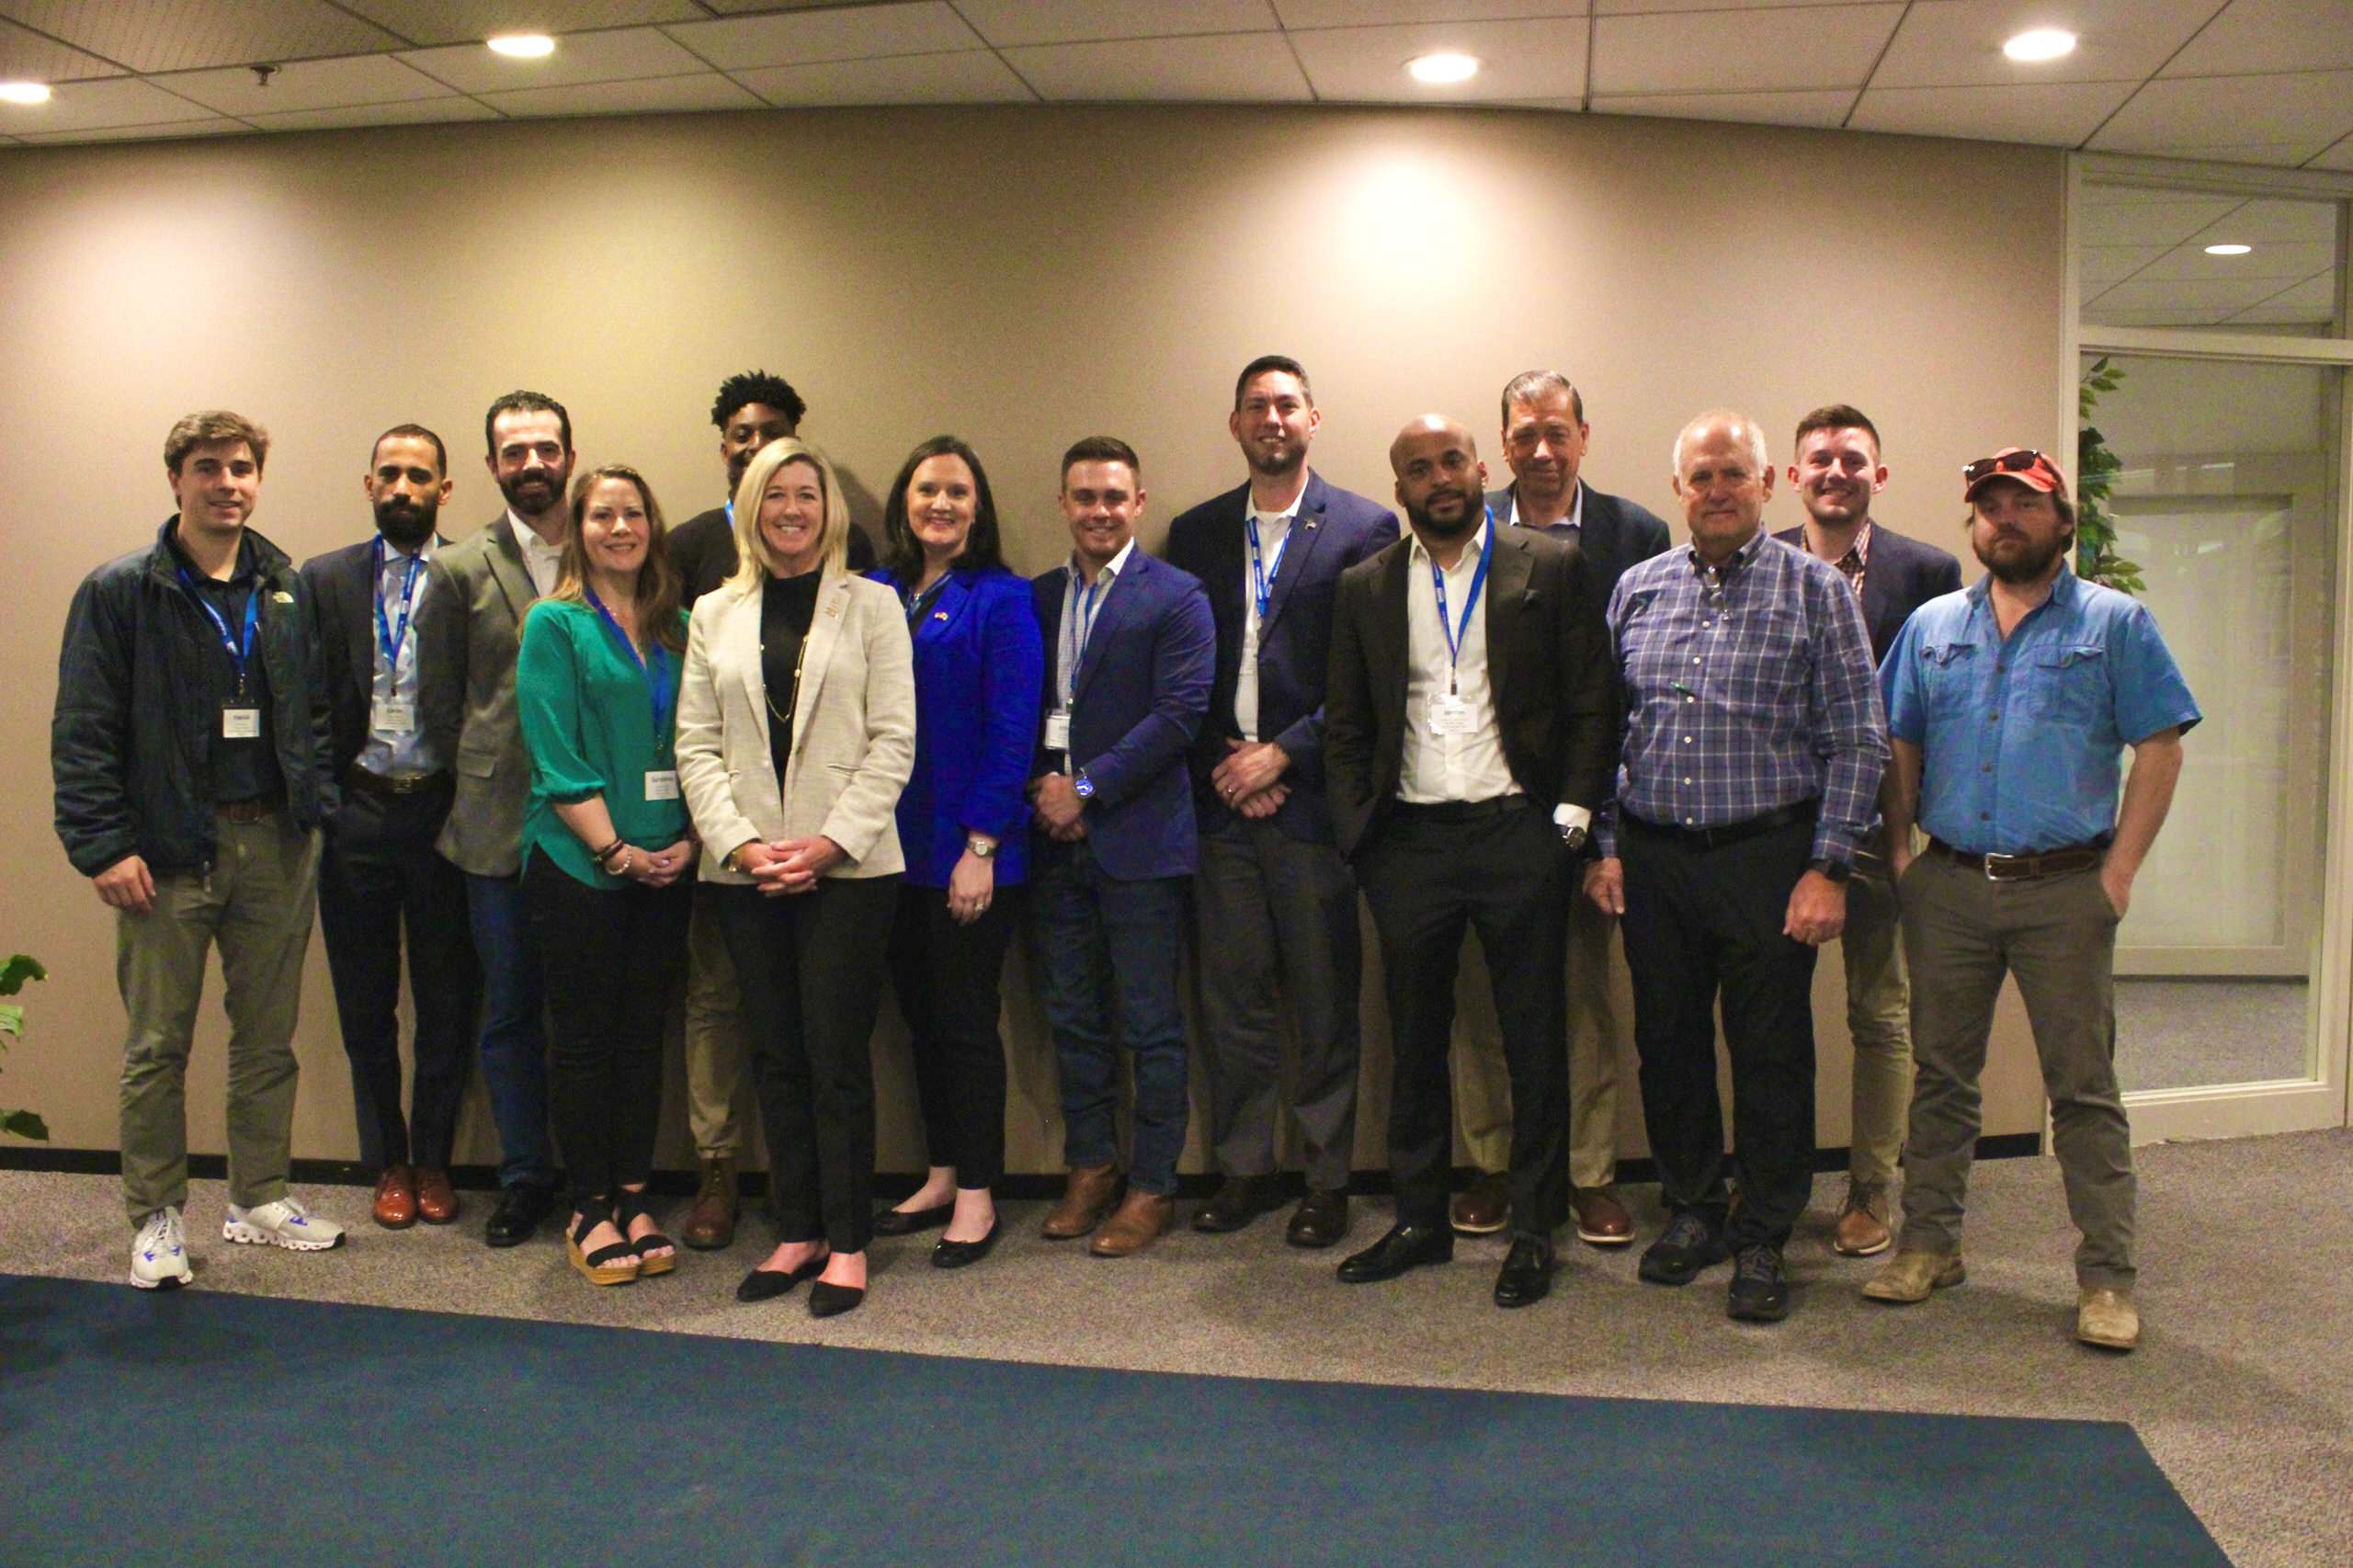 Geraldine Smith, owner of All Inclusive Construction and Building, was invited to go to DC for an NAHB Leadership Orientation. She and other emerging leaders met with senior officers of the NAHB and m